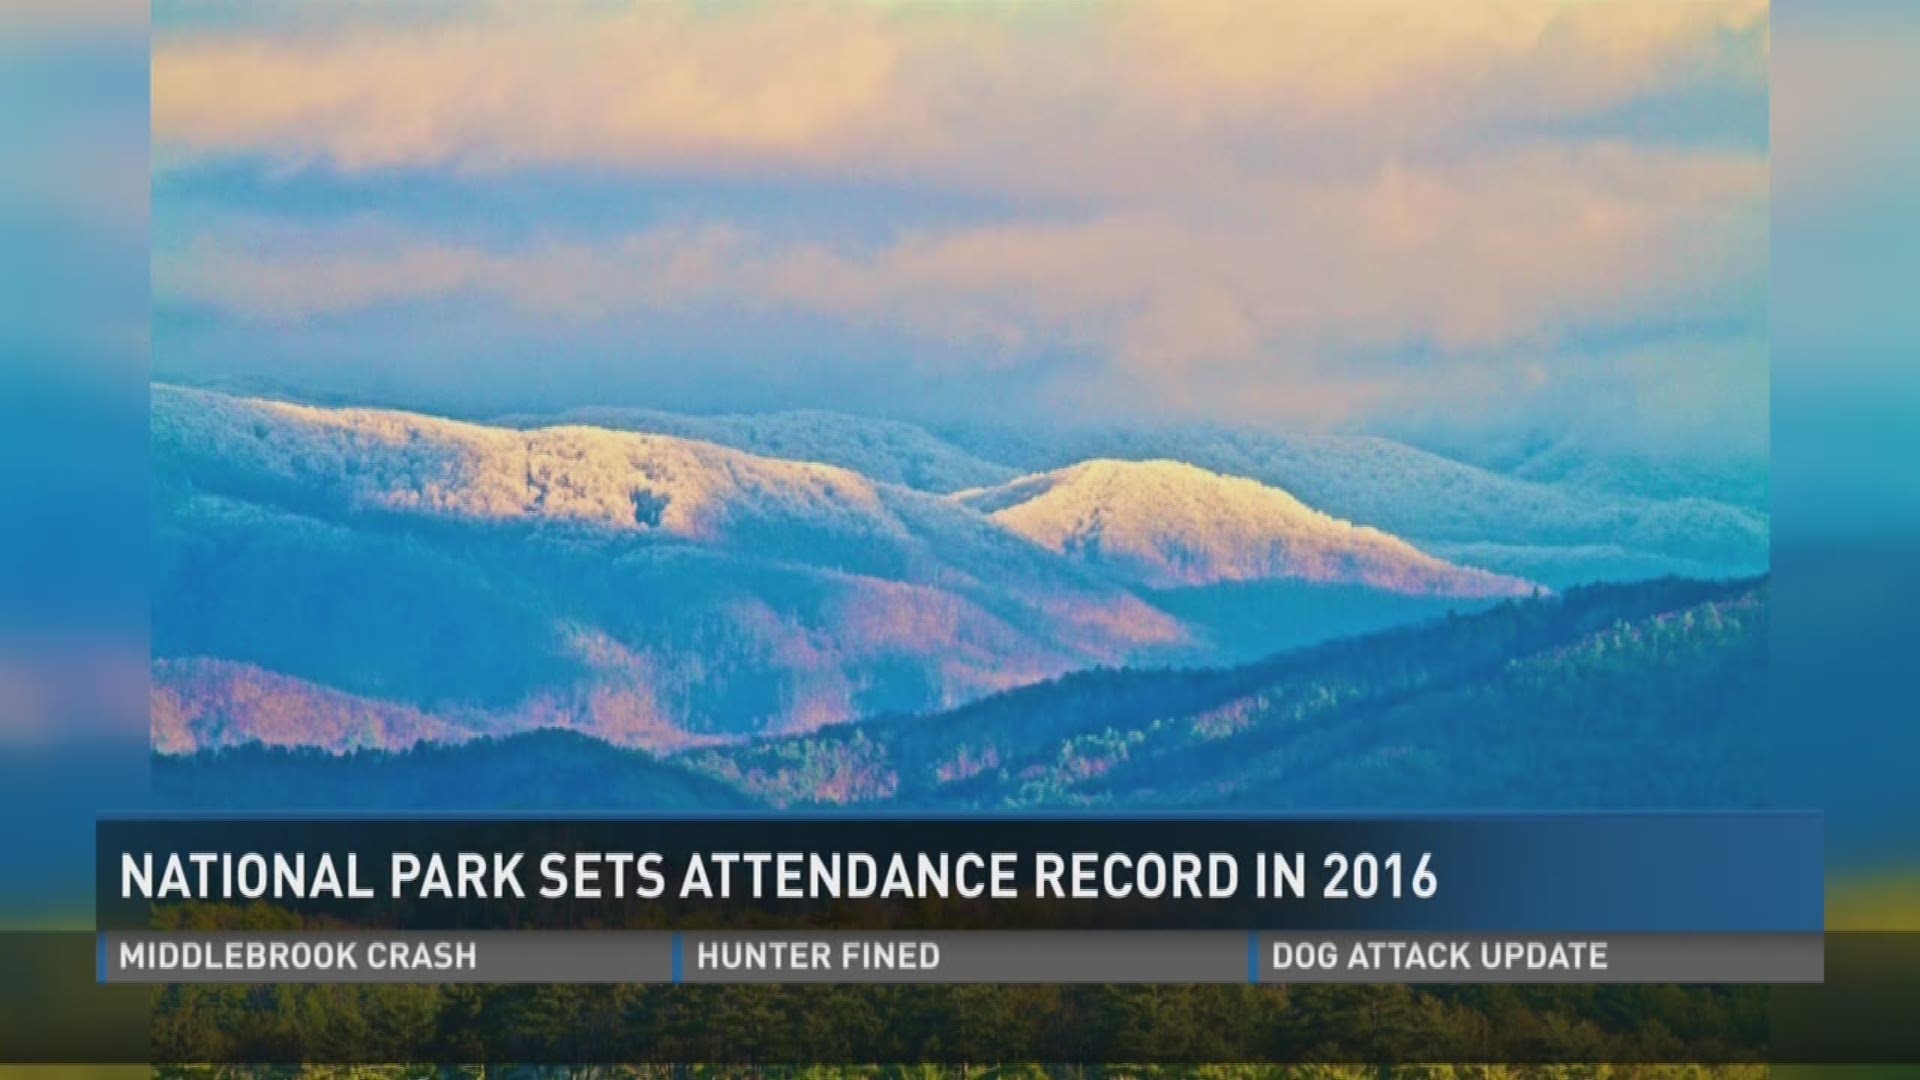 The Great Smoky Mountains National Park welcomed a record 11.31 million people in 2016, according to a National Park Service release.